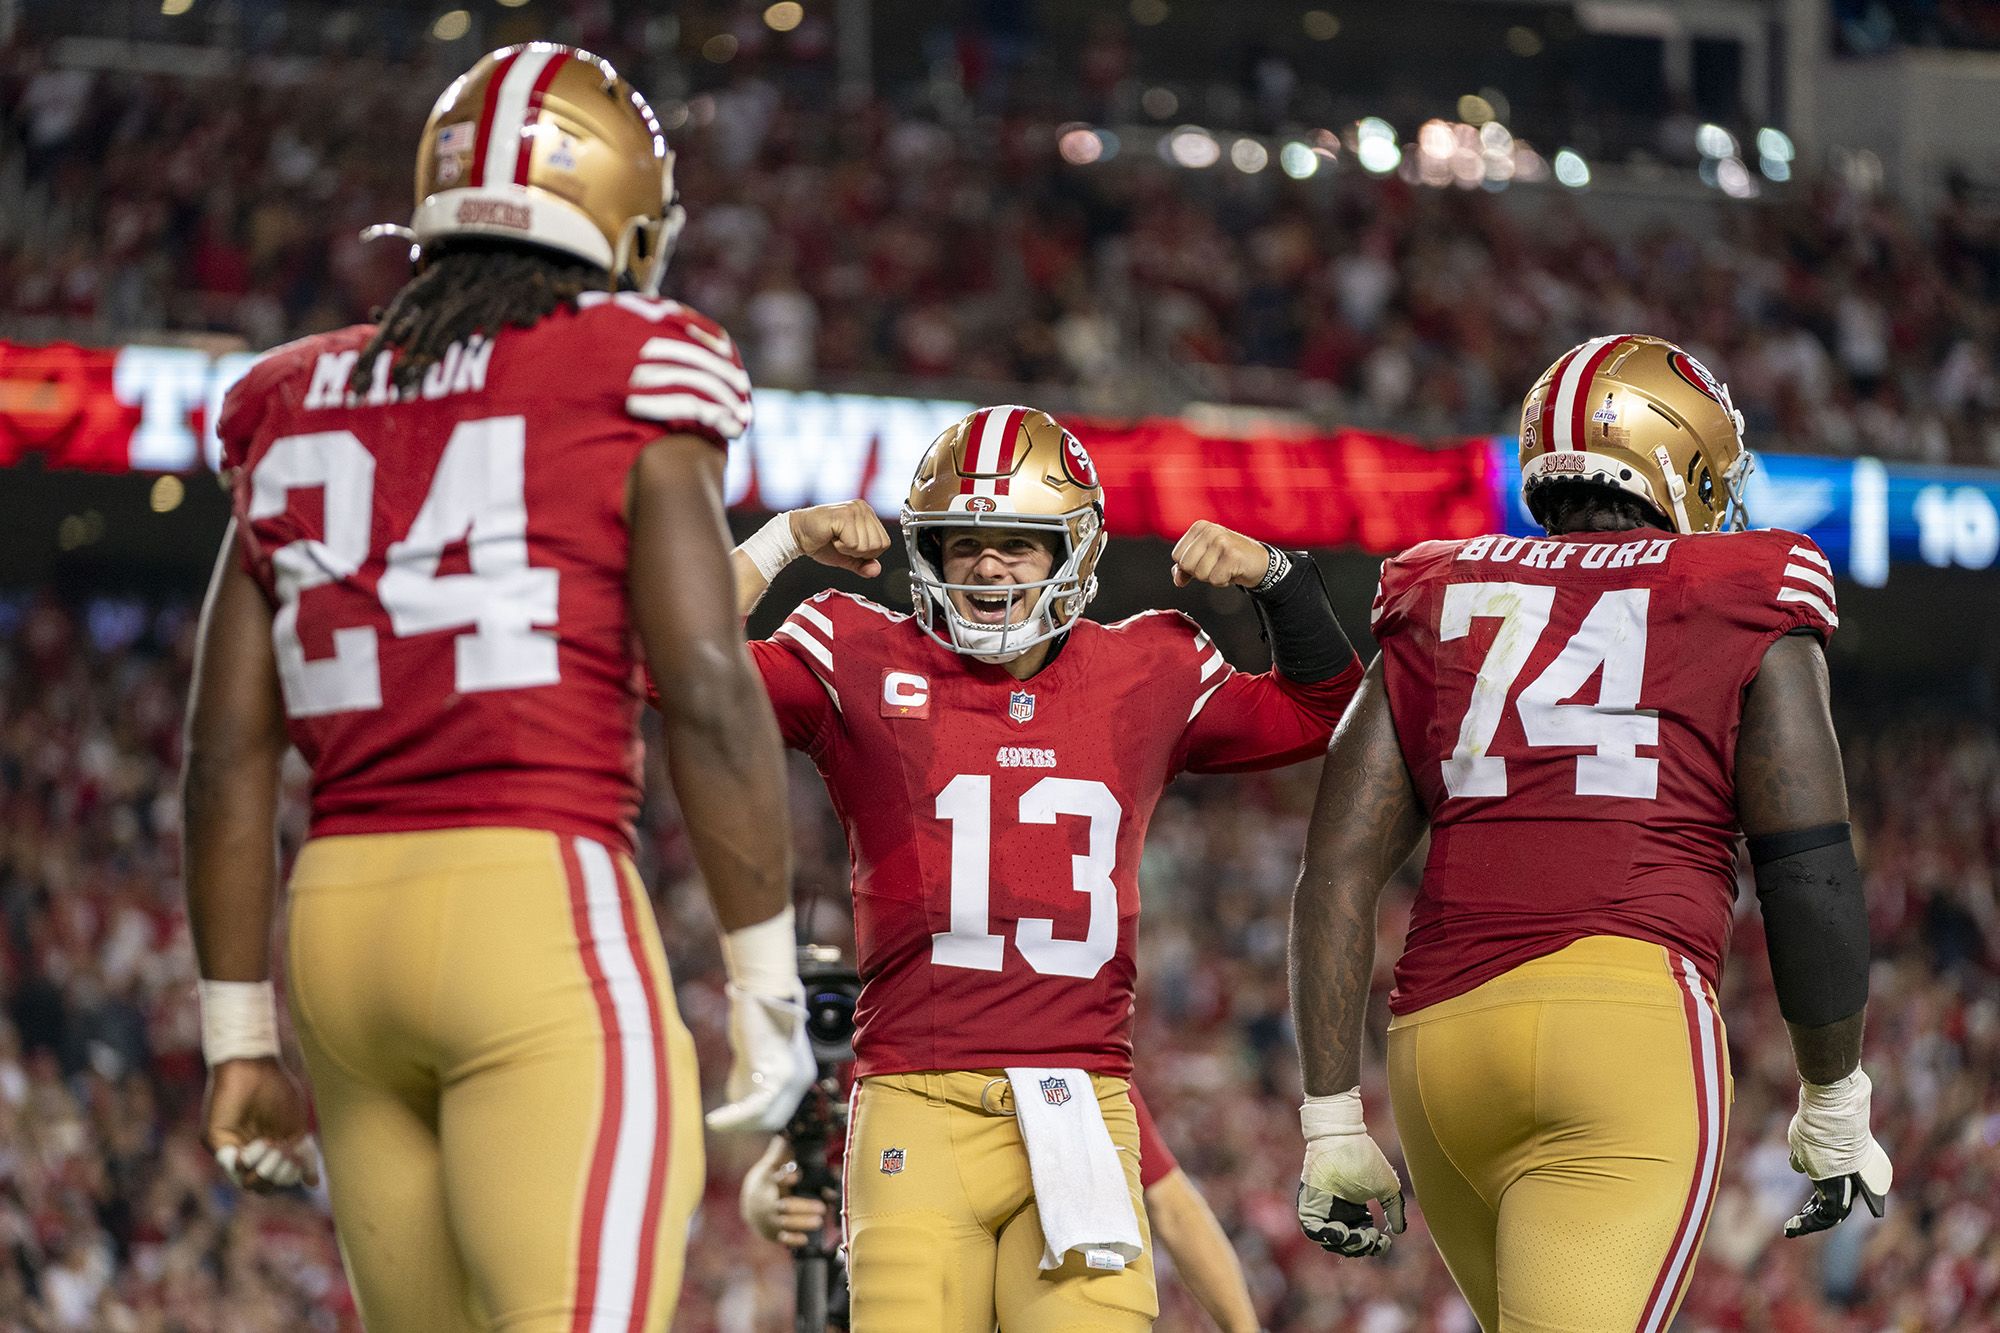 Giants vs. 49ers Final Score, Results, and Highlights: Brock Purdy